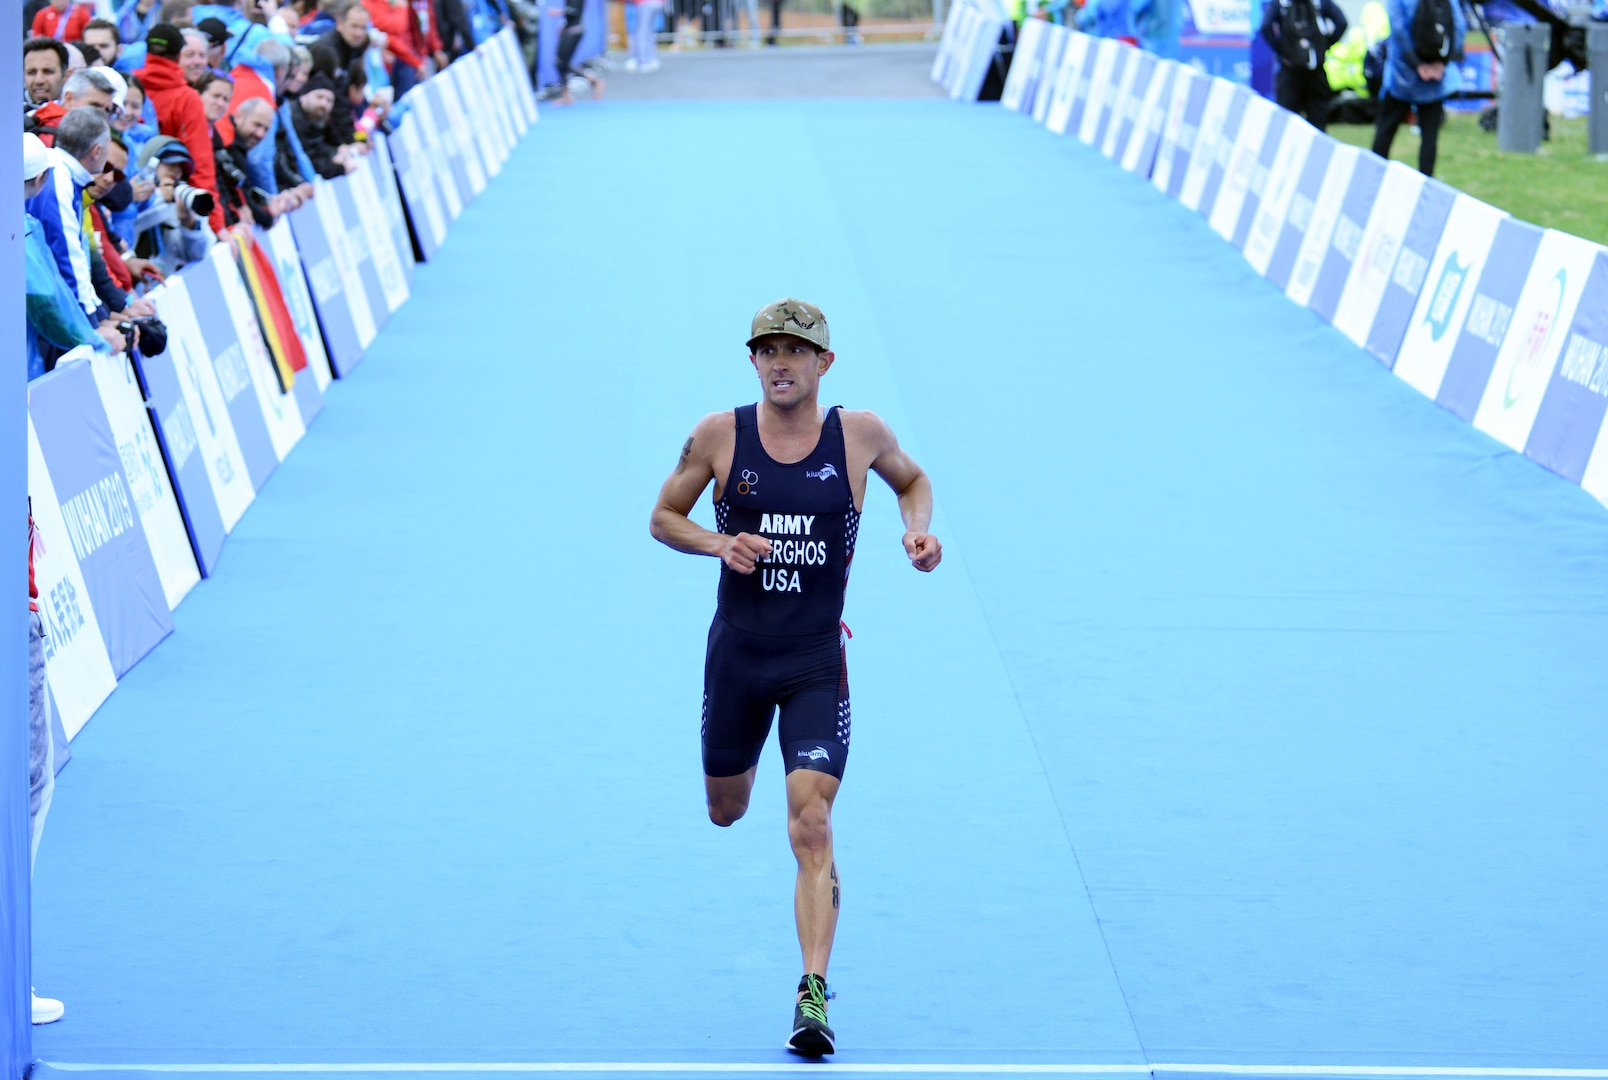 USA triathlon competitor Army Capt. Nicholas Sterghos of Fort Carson, Colo., crosses the finish line of the men's triathlon at the Military World Games in Wuhan, China, Oct. 27, 2019 with a time of 1:49:56.